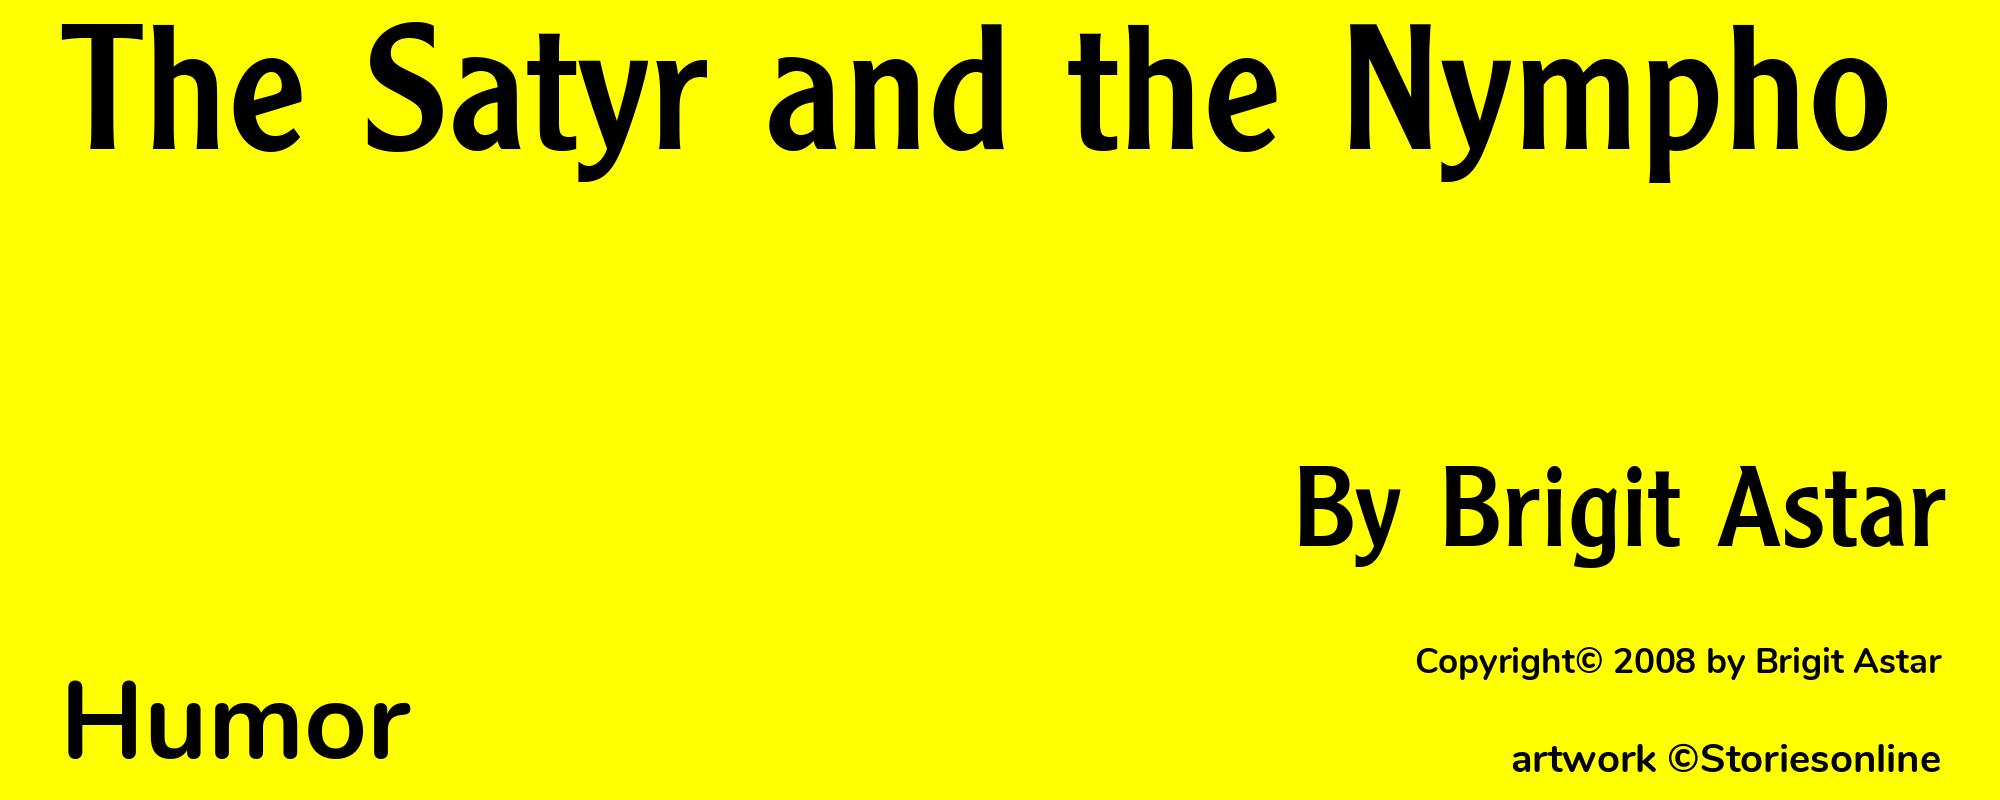 The Satyr and the Nympho - Cover